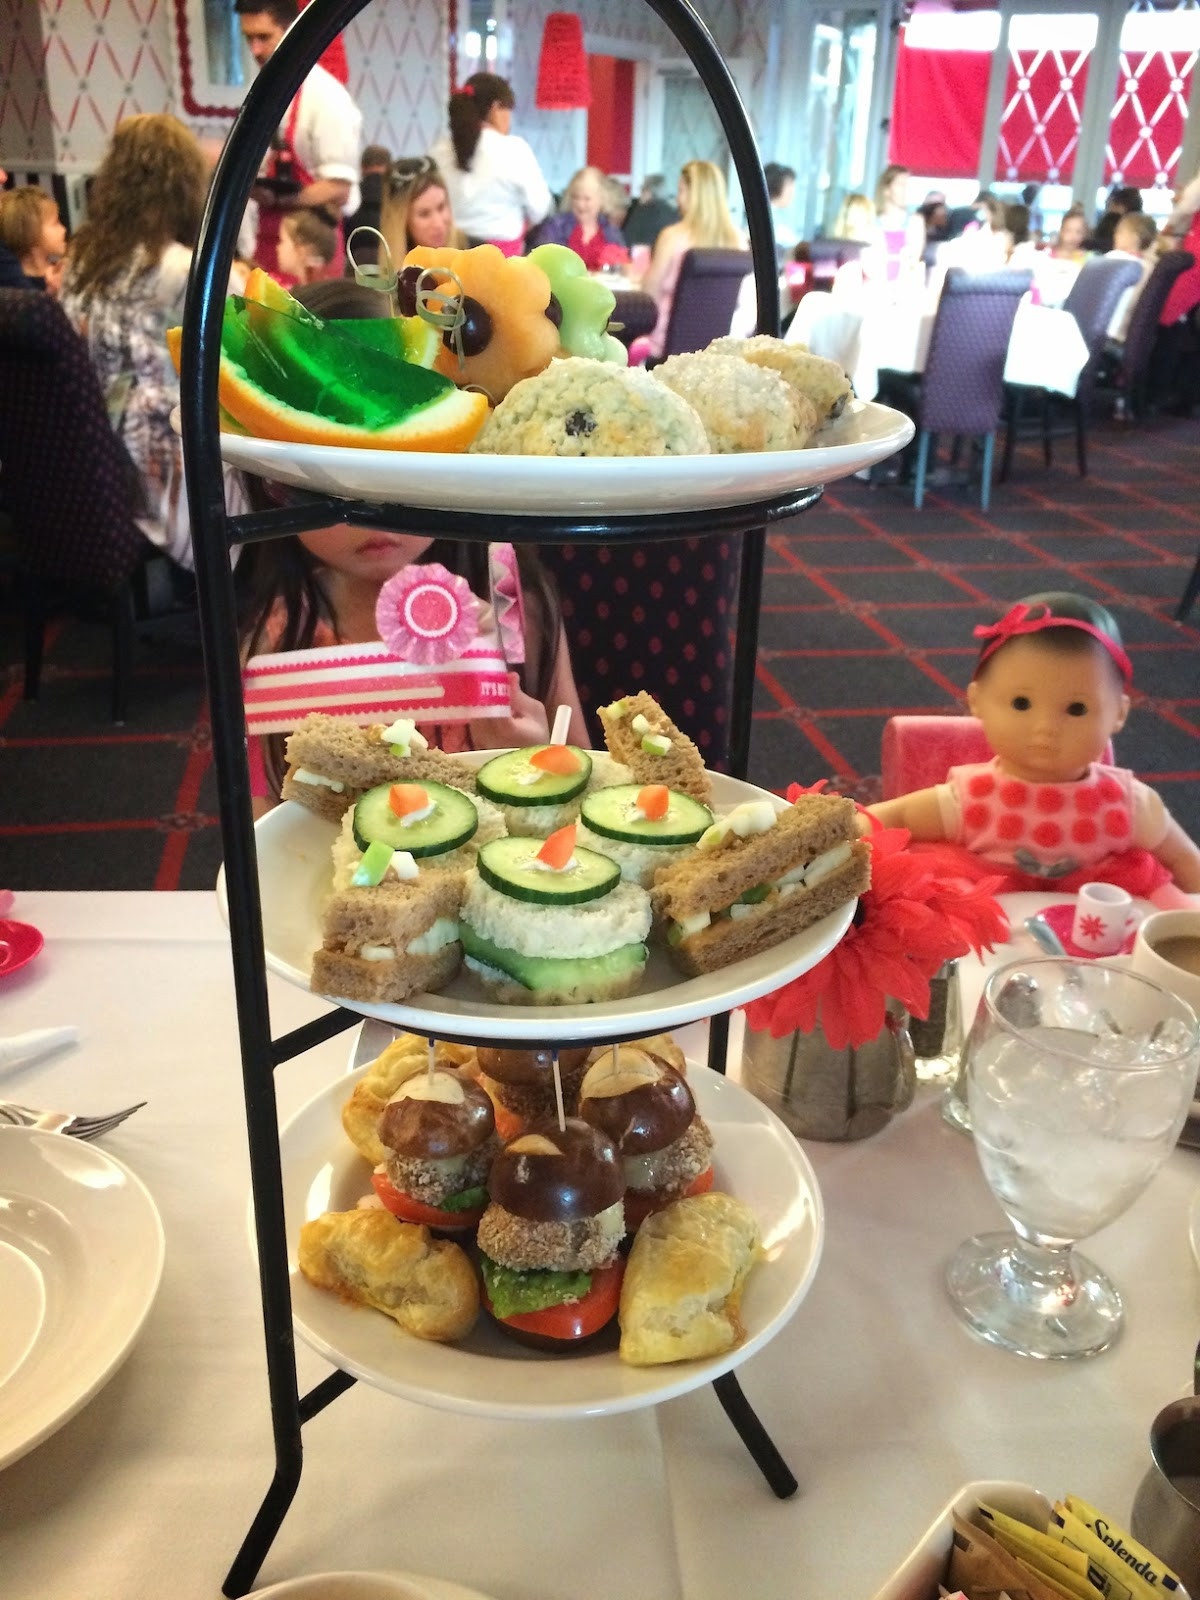 American Girl Tea Party Ideas
 American Girl Afternoon Tea Experience Bonding Time with